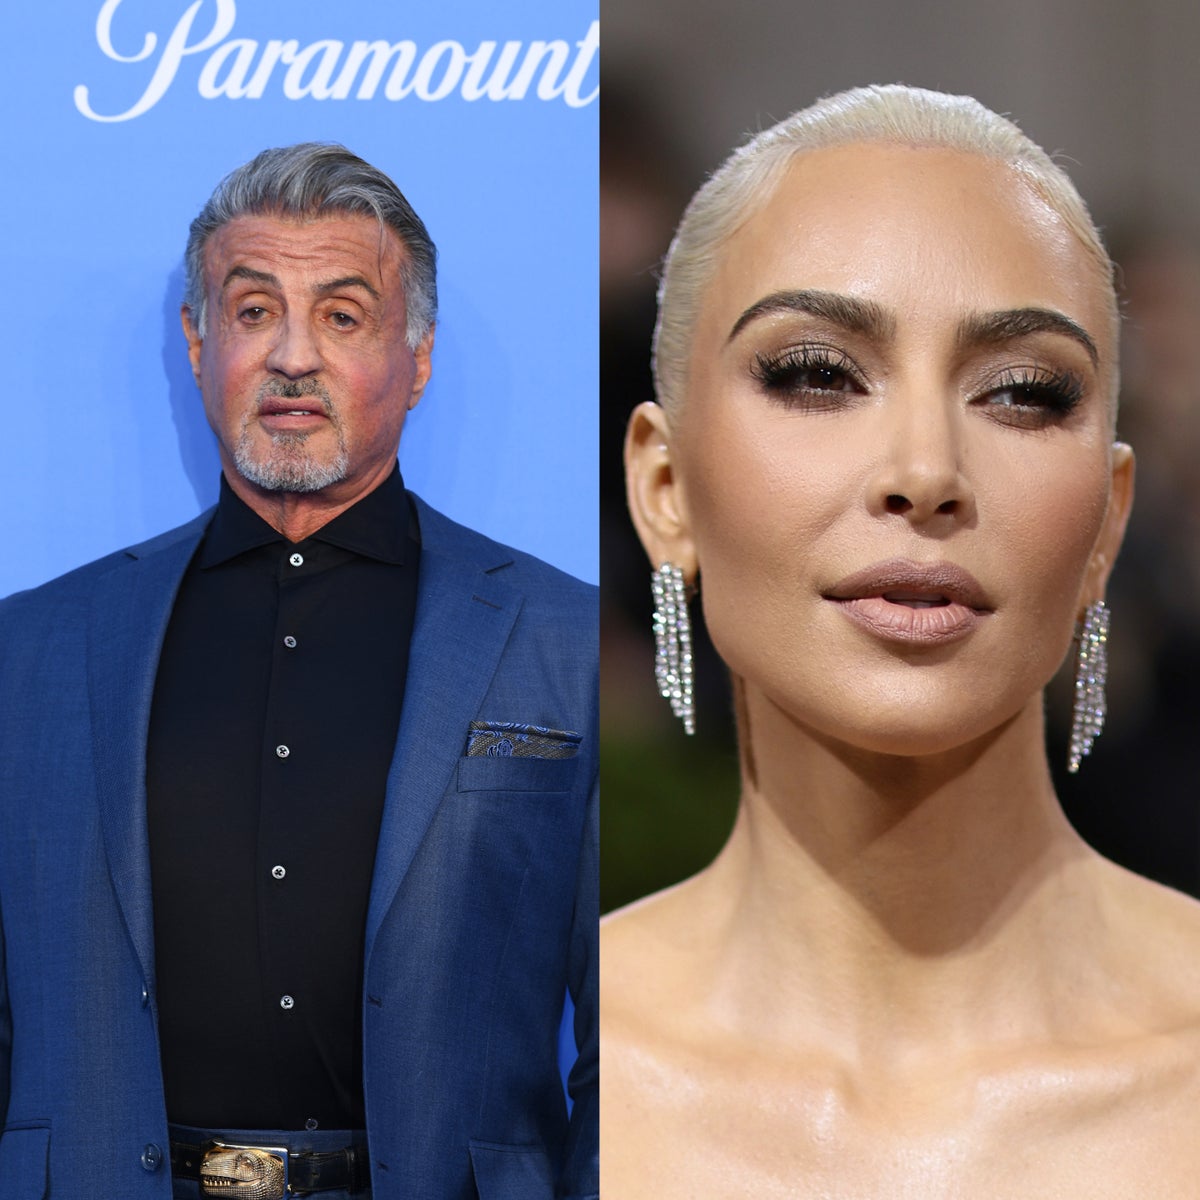 Sylvester Stallone, Kevin Hart, Kim Kardashian among biggest names in water waste, says report